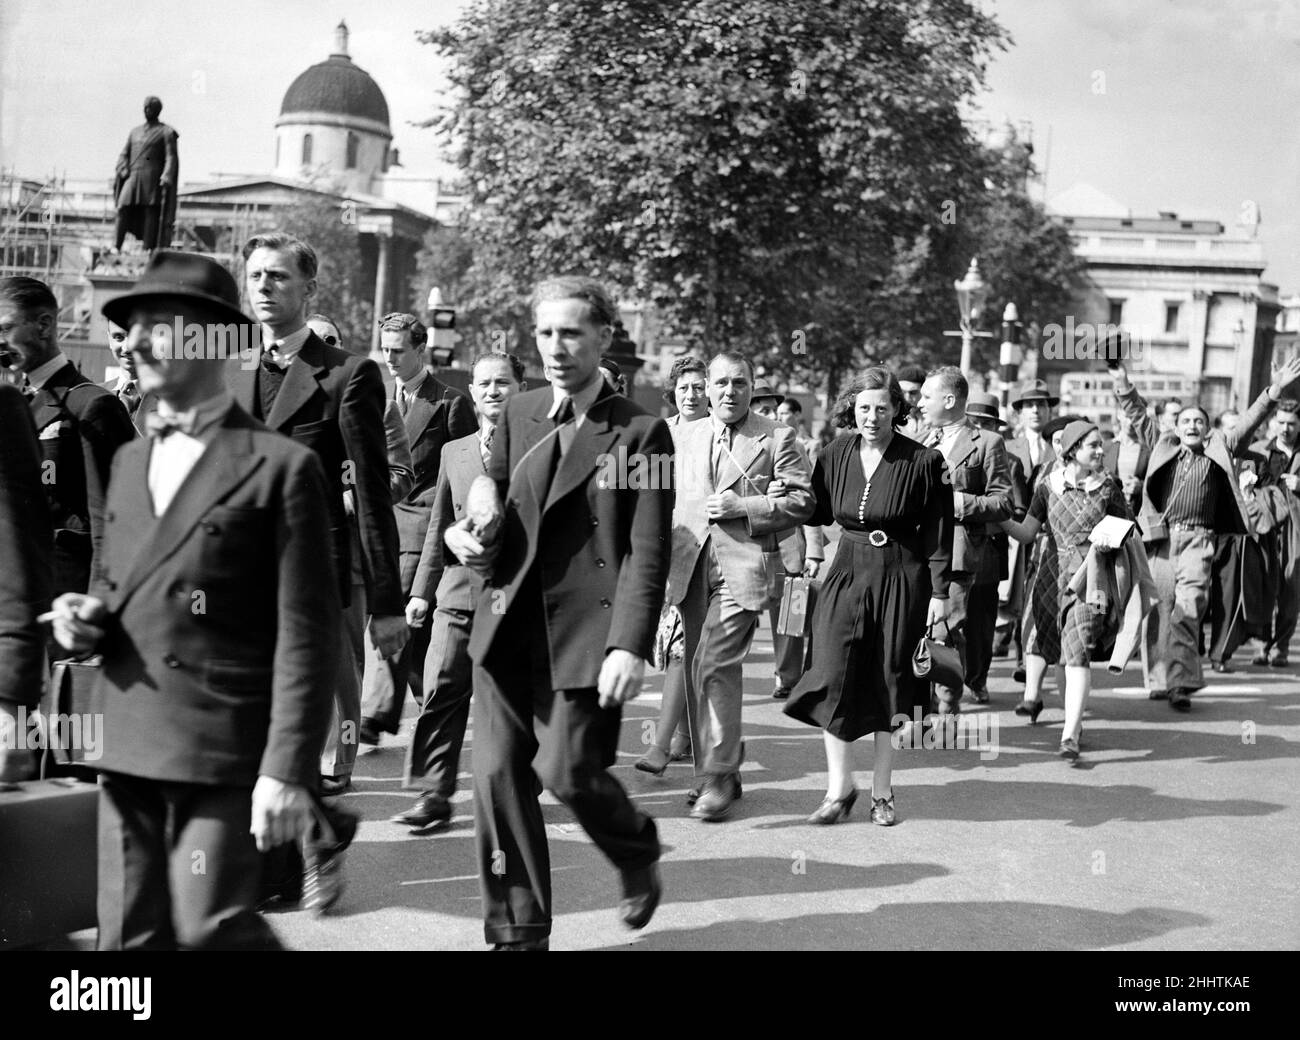 3rd September 1939, Large crowds seen here in Trafalgar Square making their way to Downing Street, Whitehall and the Houses of Parliament as the zero hour 11am approached which was the time limit for the ultimatum to Germany to expired. Prime Minister Neville Chamberlain announced shortly after 11 that Great Britian had declared war on Germany following the Nazi refusal to retreat from Poland Stock Photo